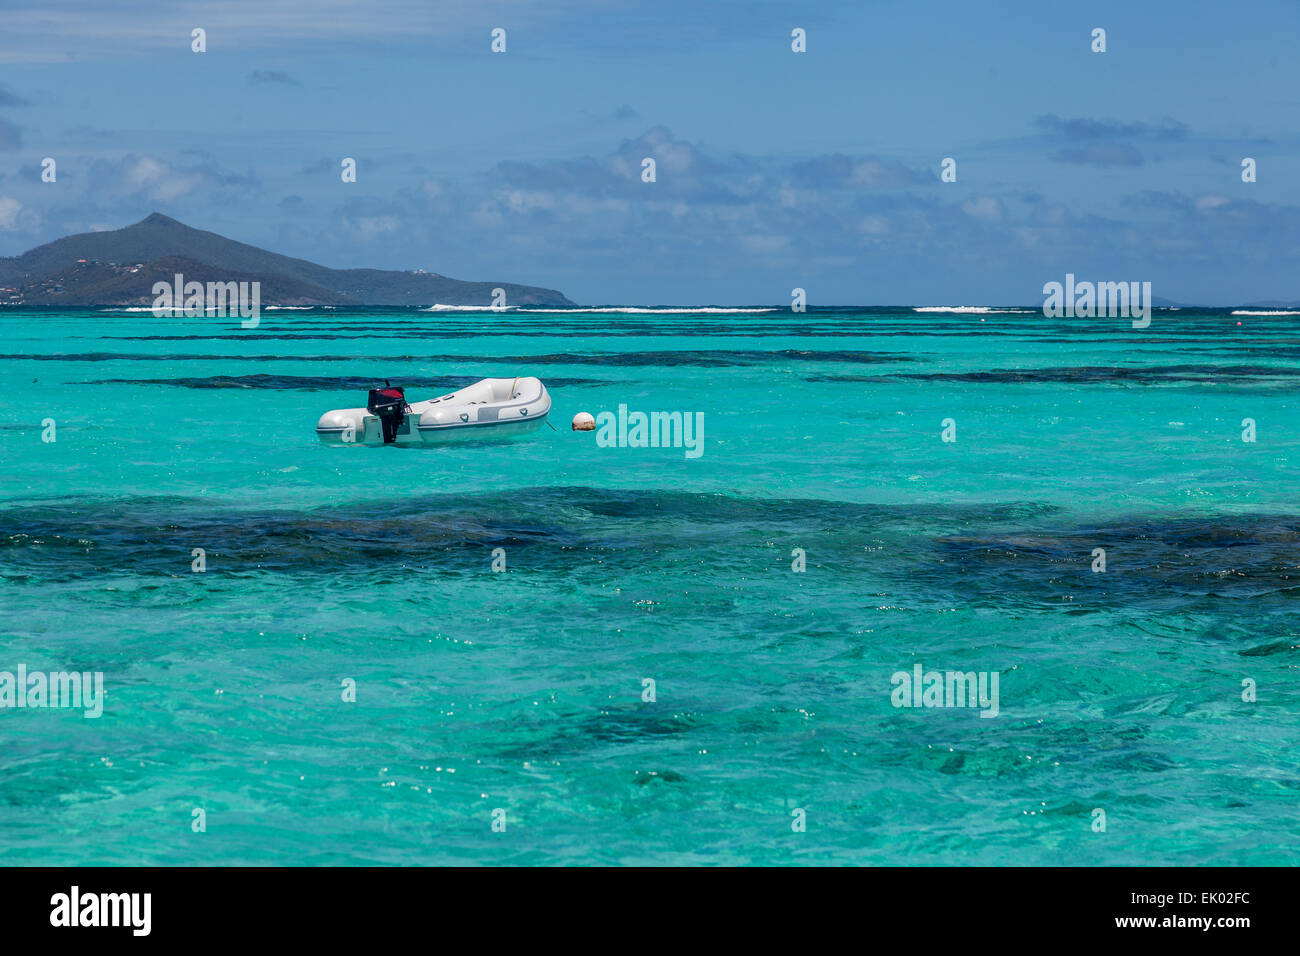 An empty dinghy on tropical water. Stock Photo